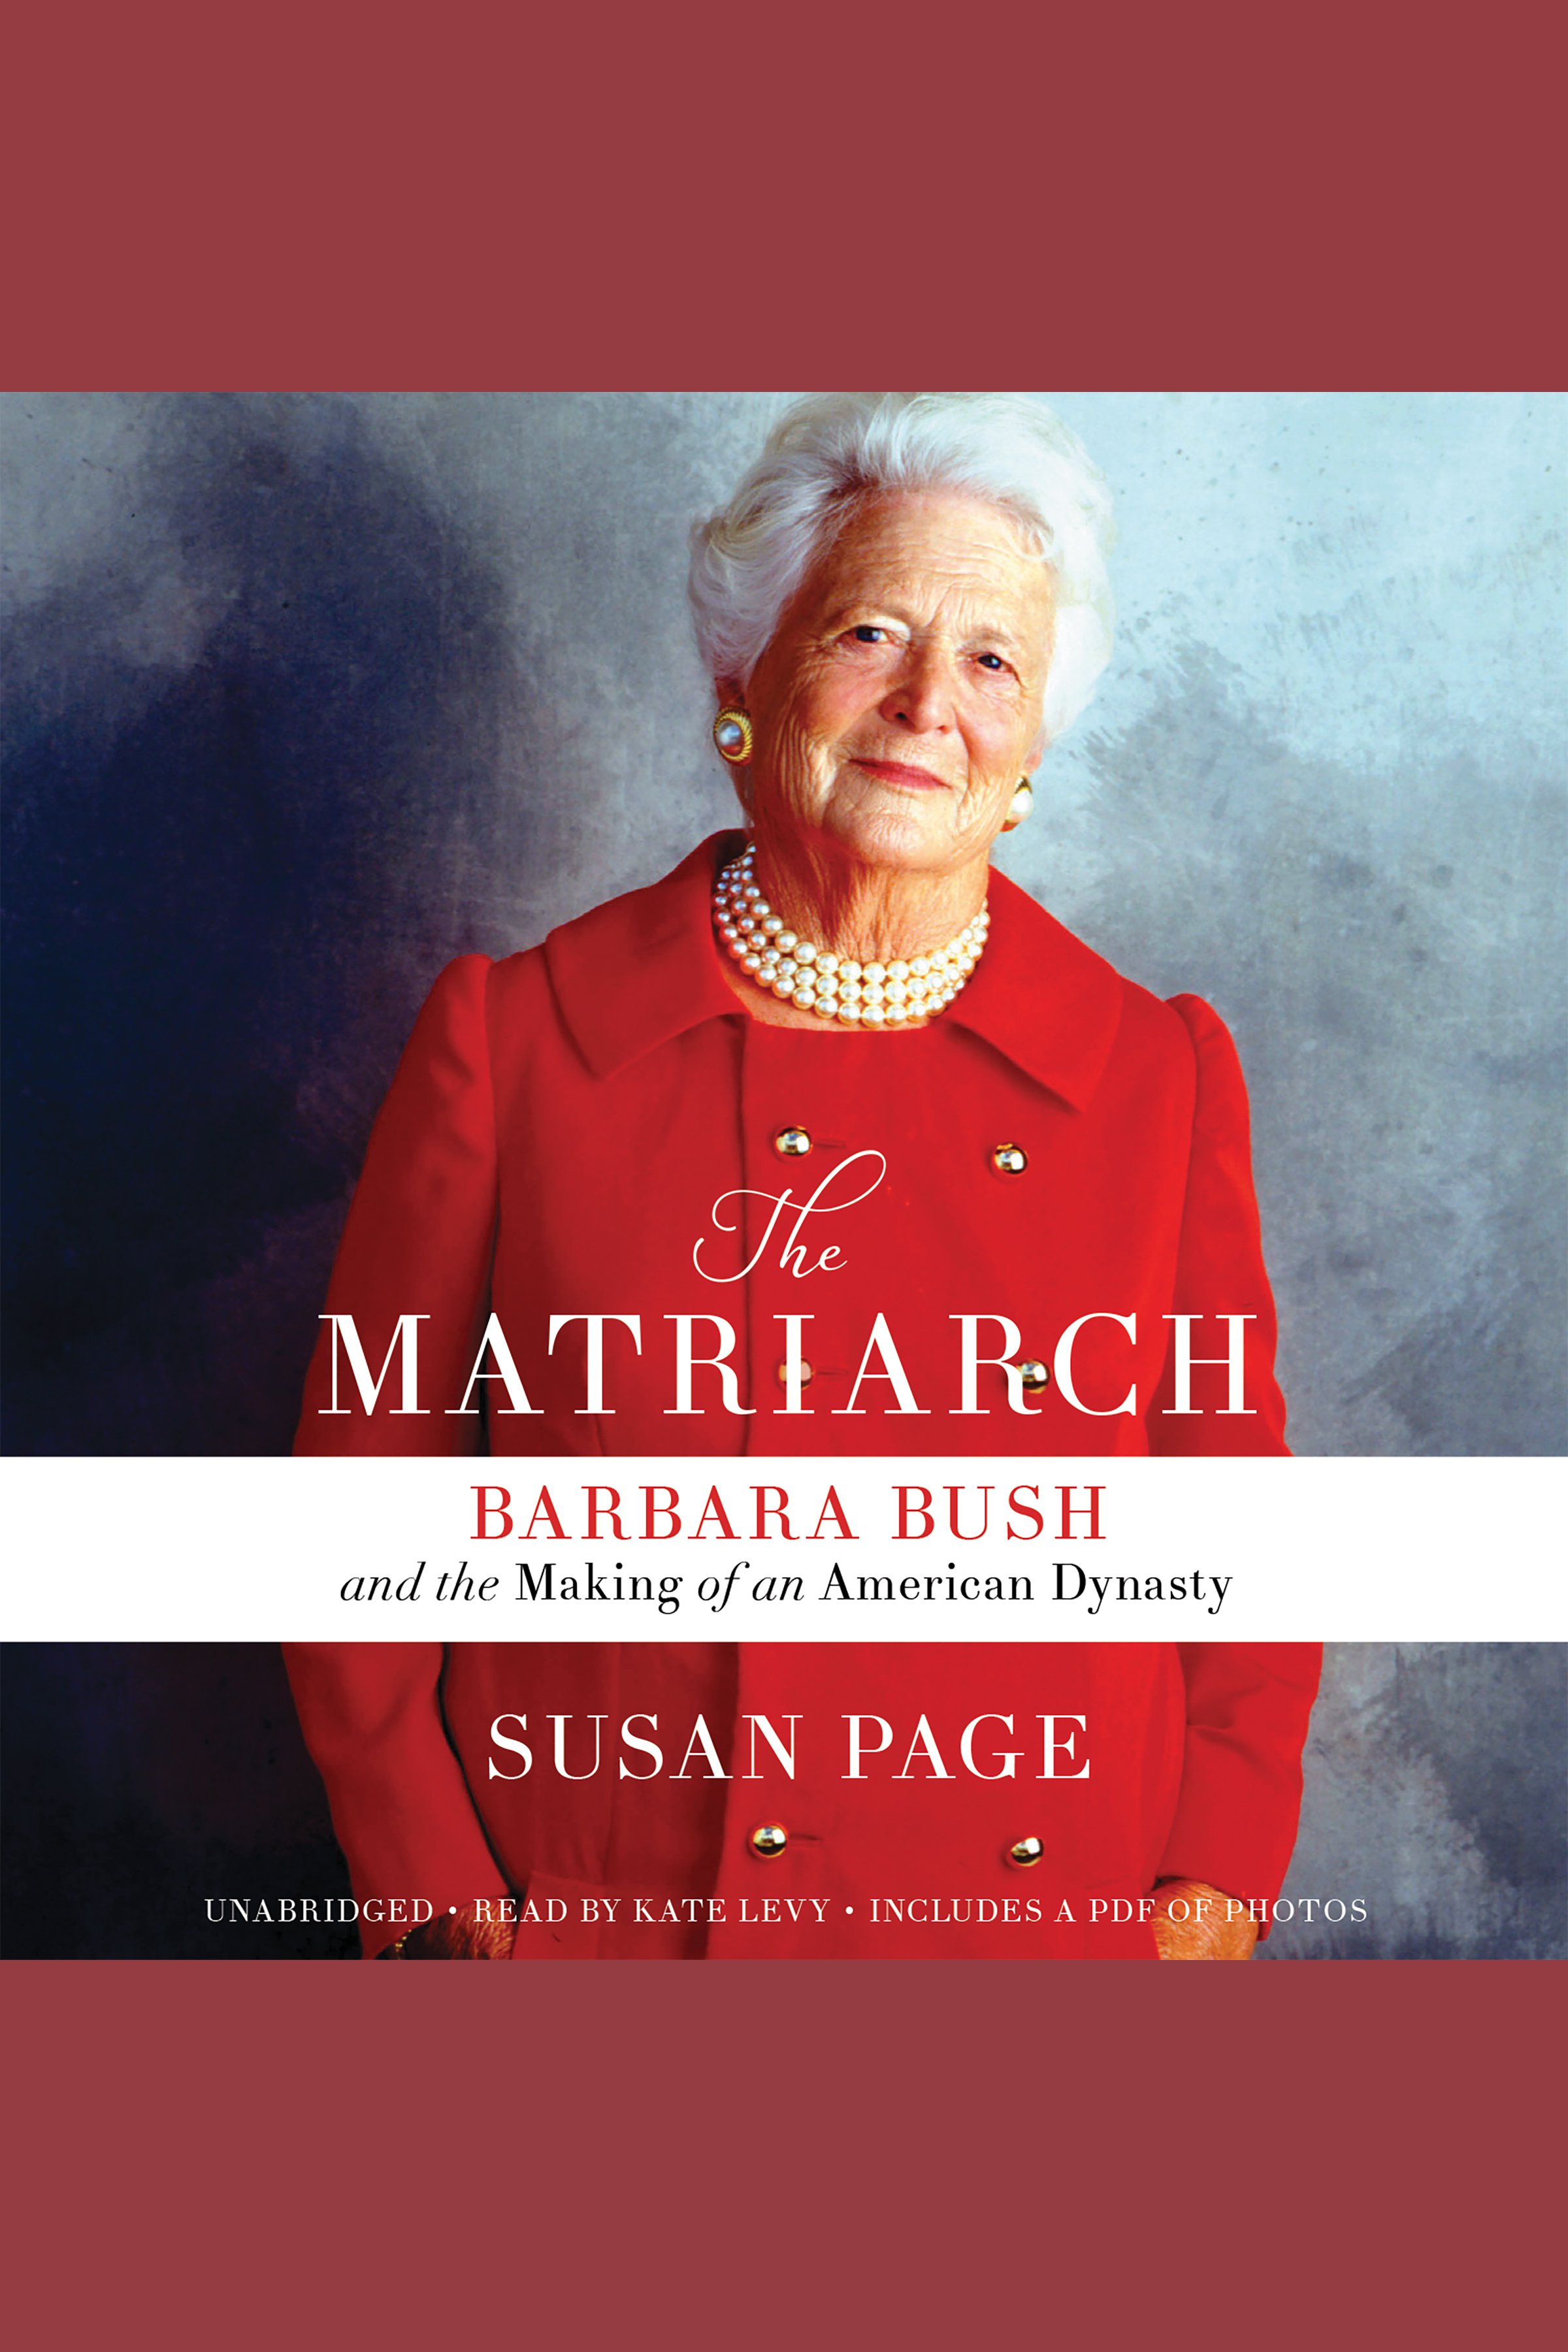 Umschlagbild für Matriarch, The [electronic resource] : Barbara Bush and the Making of an American Dynasty